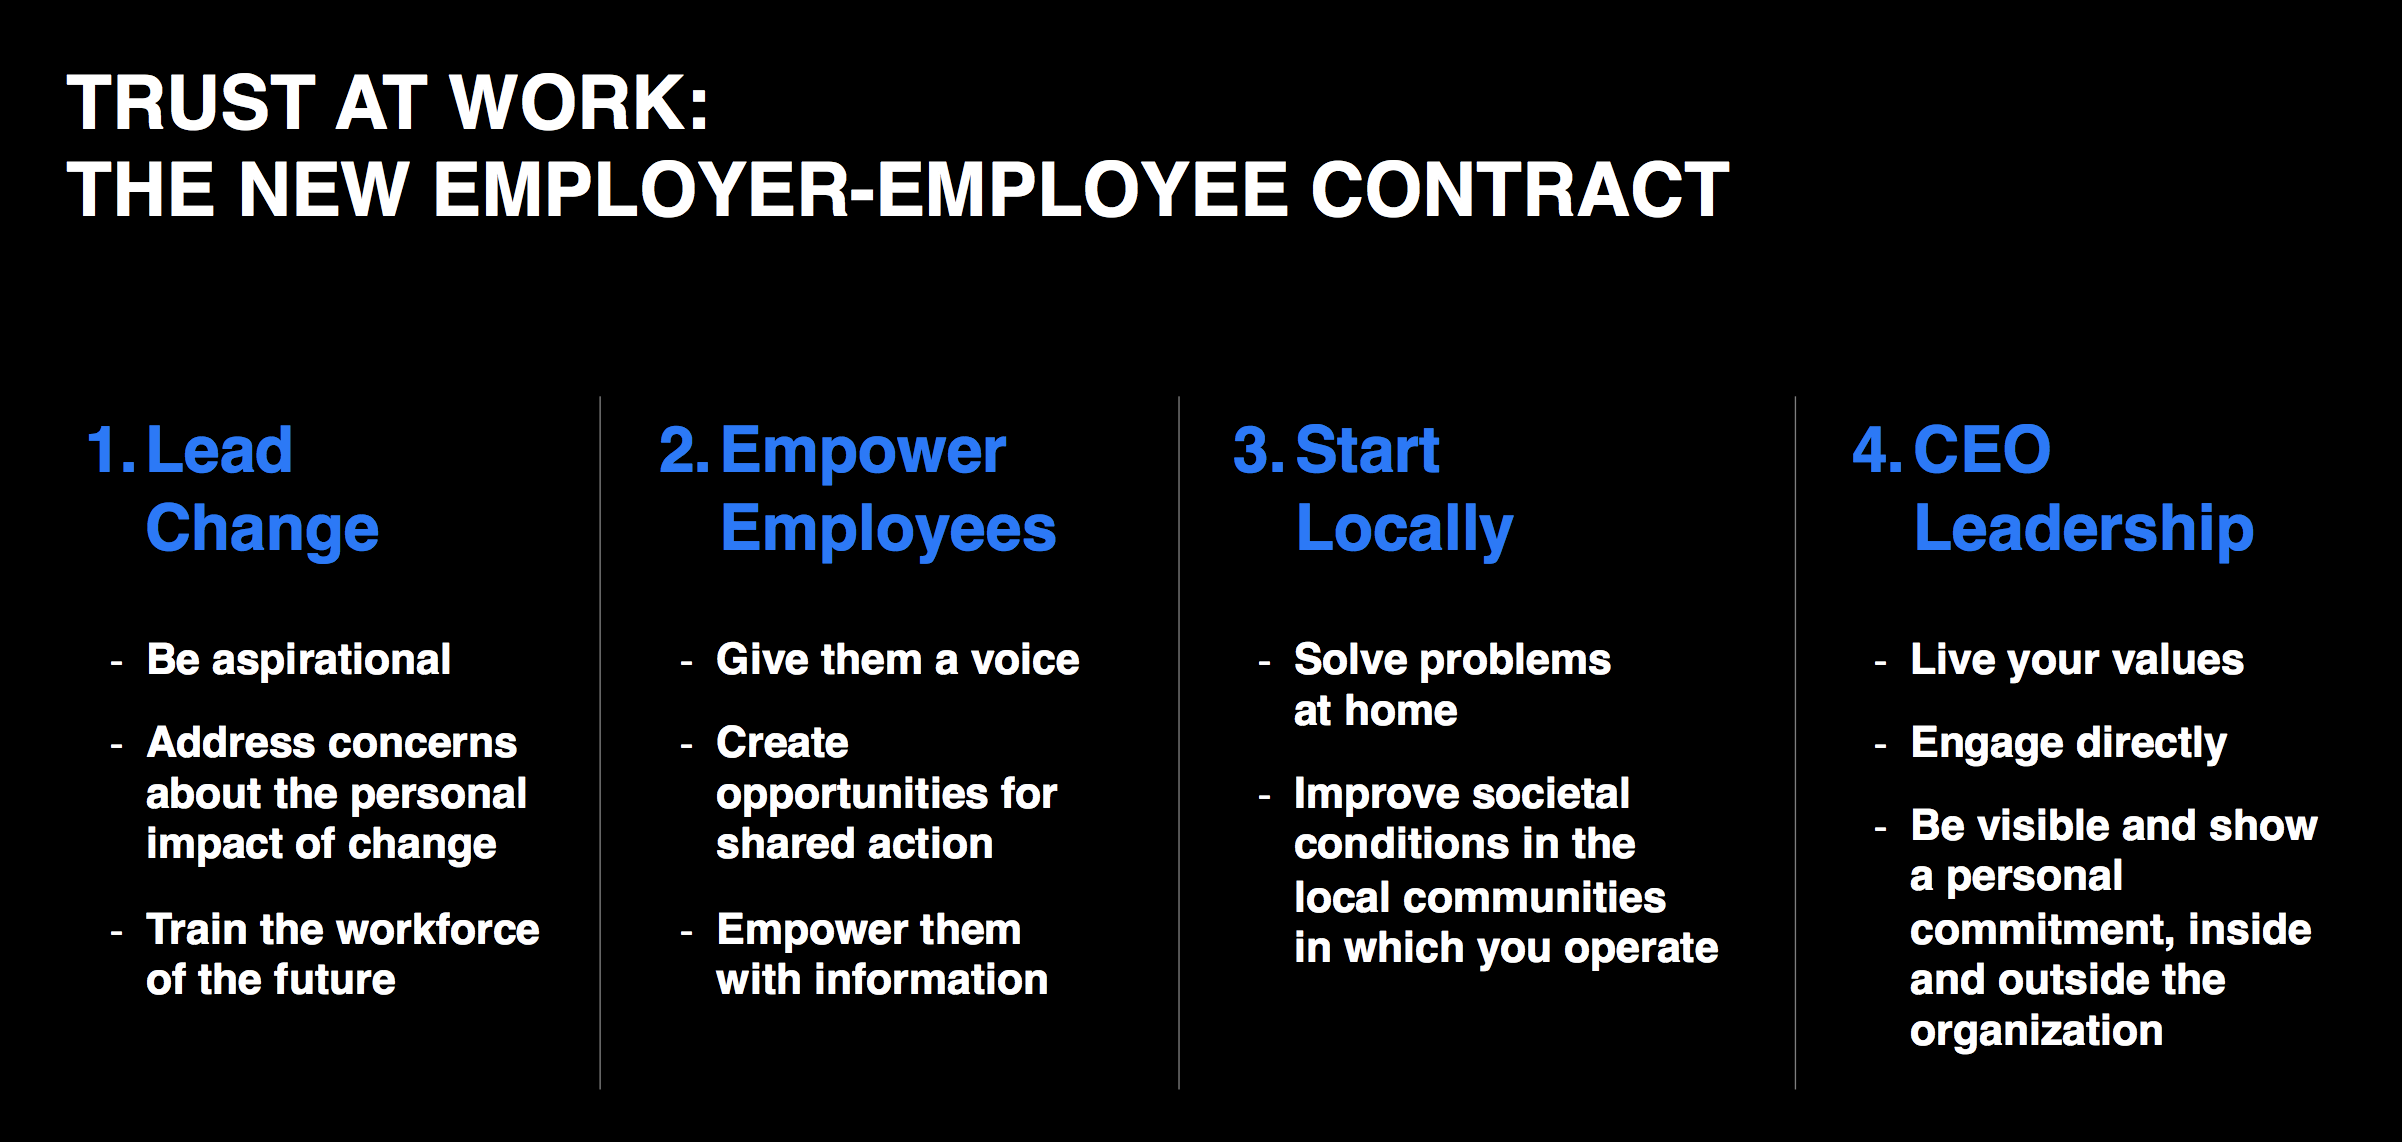 trust at work and the new contract emlpoyee-employer